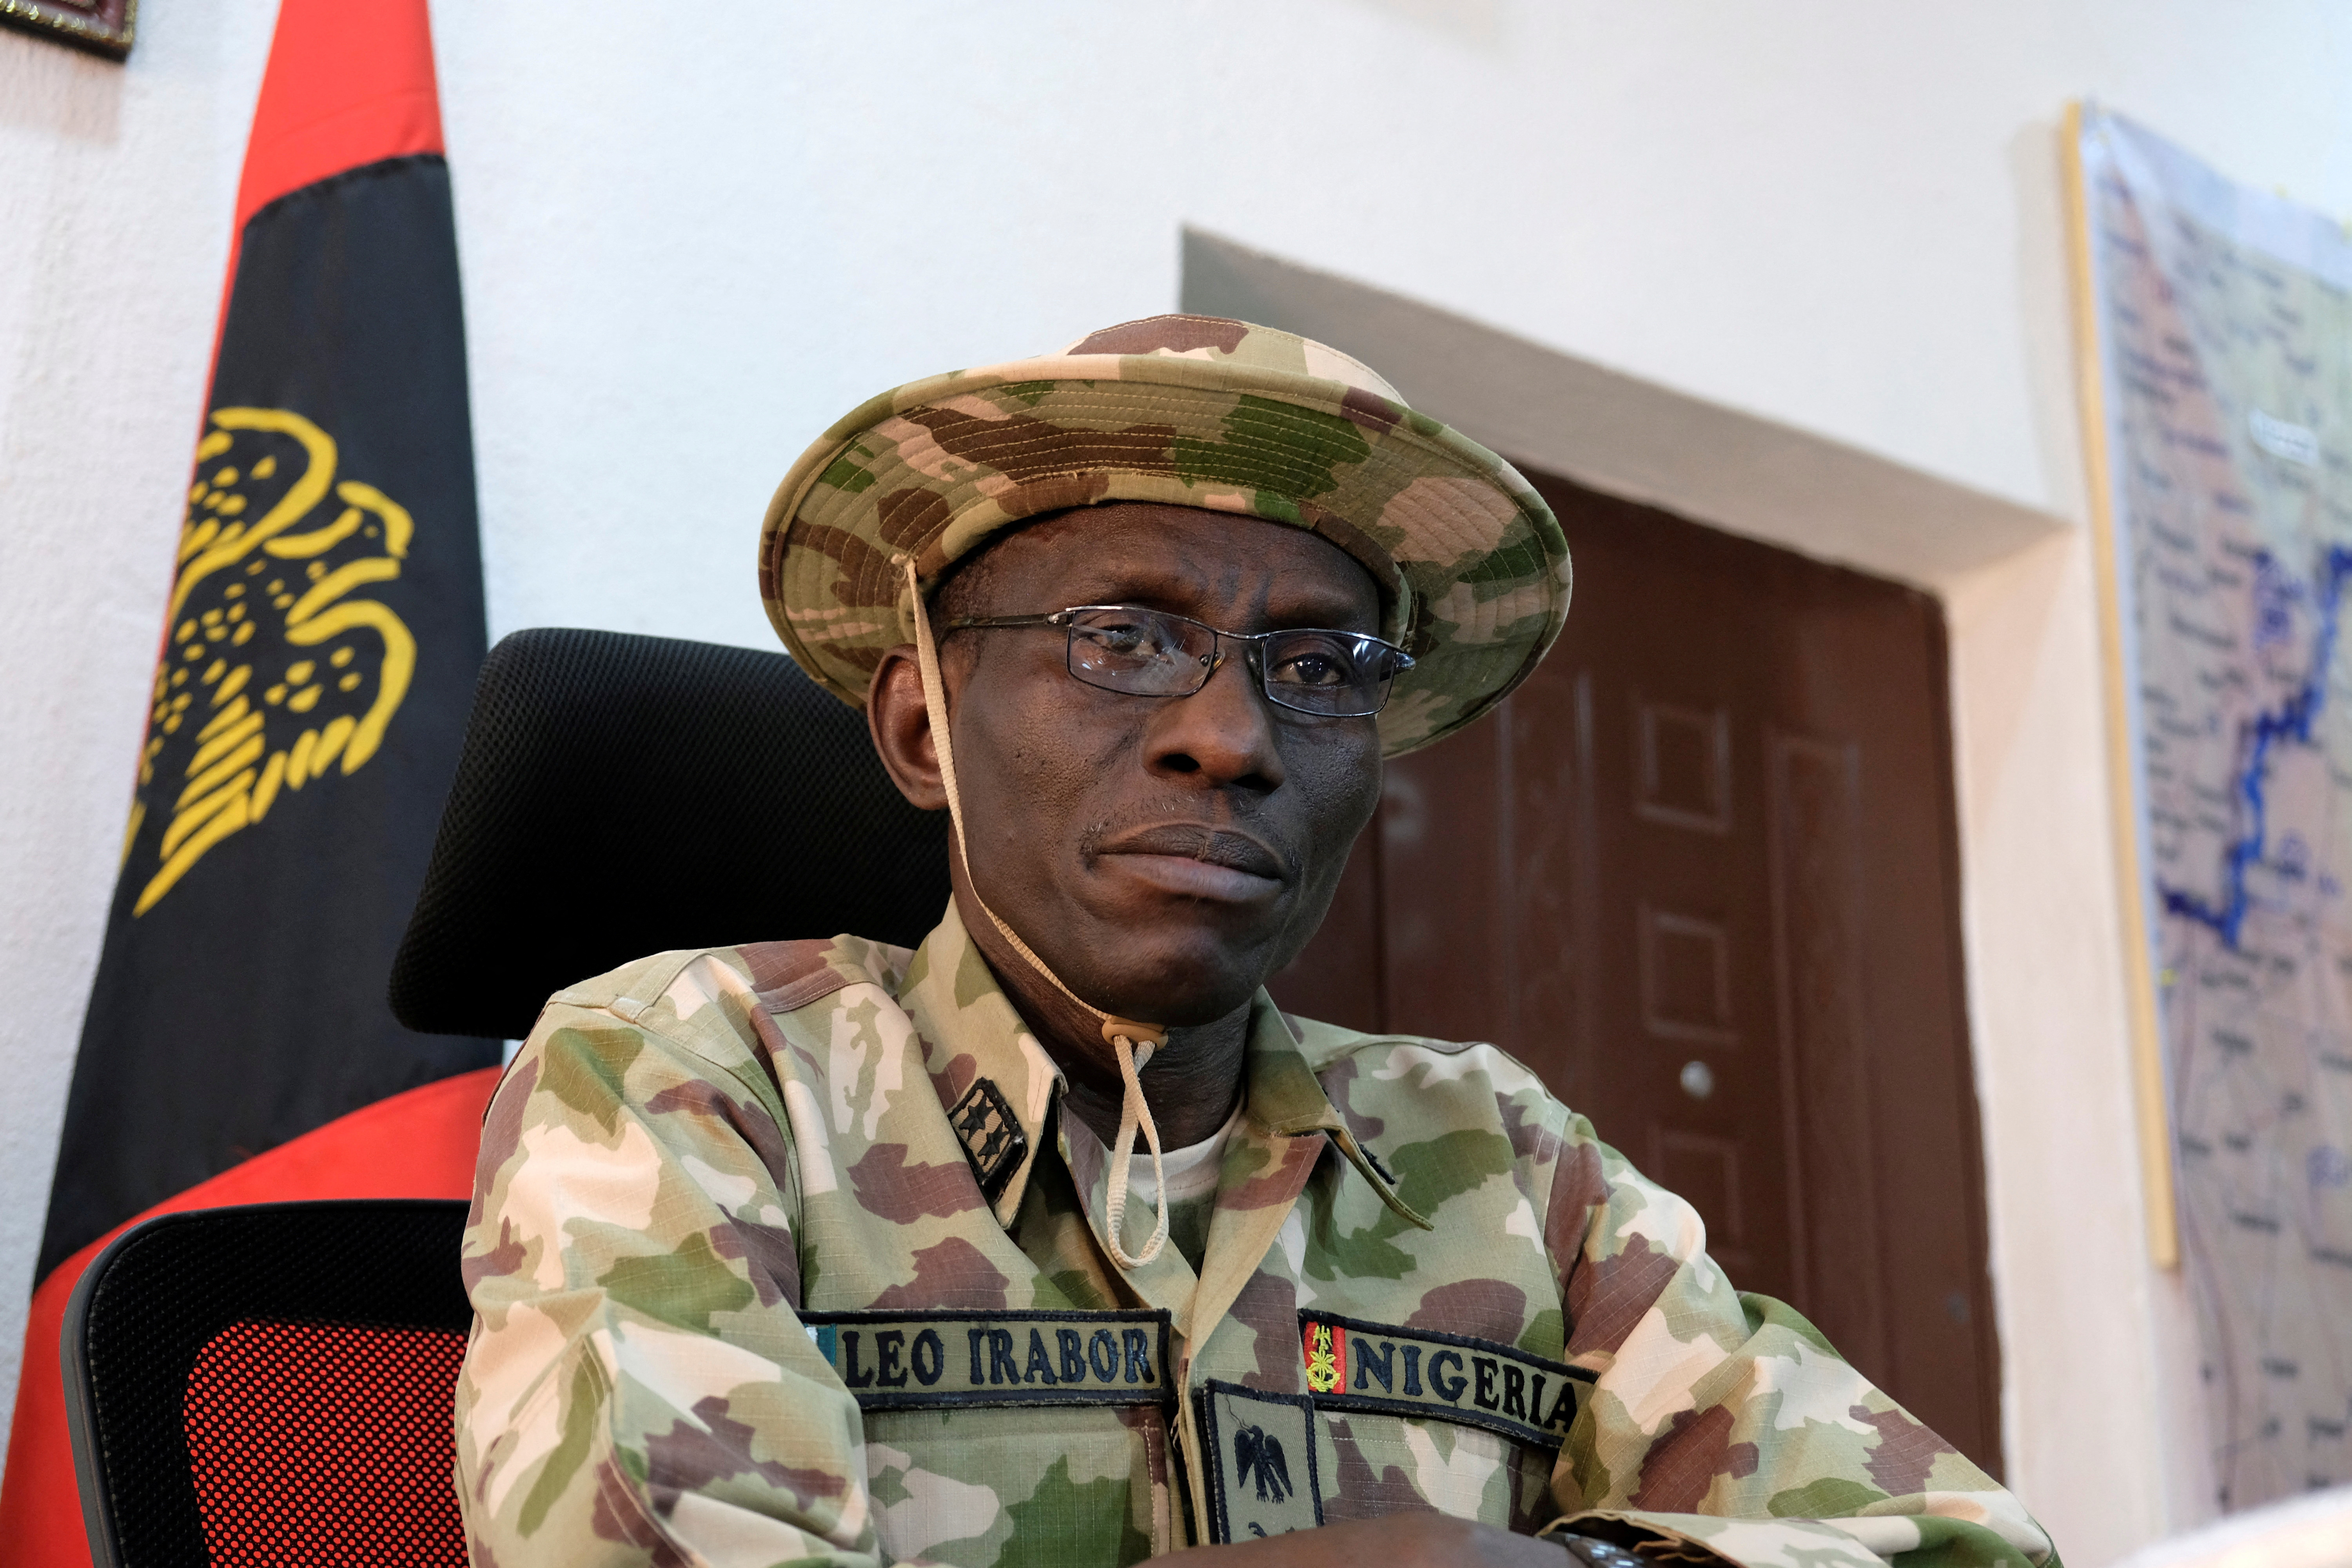 Major General Lucky Irabor, commander of the military's operation against Islamist insurgency Boko Haram in the country's northeast, speaks to media during an interview in Maiduguri